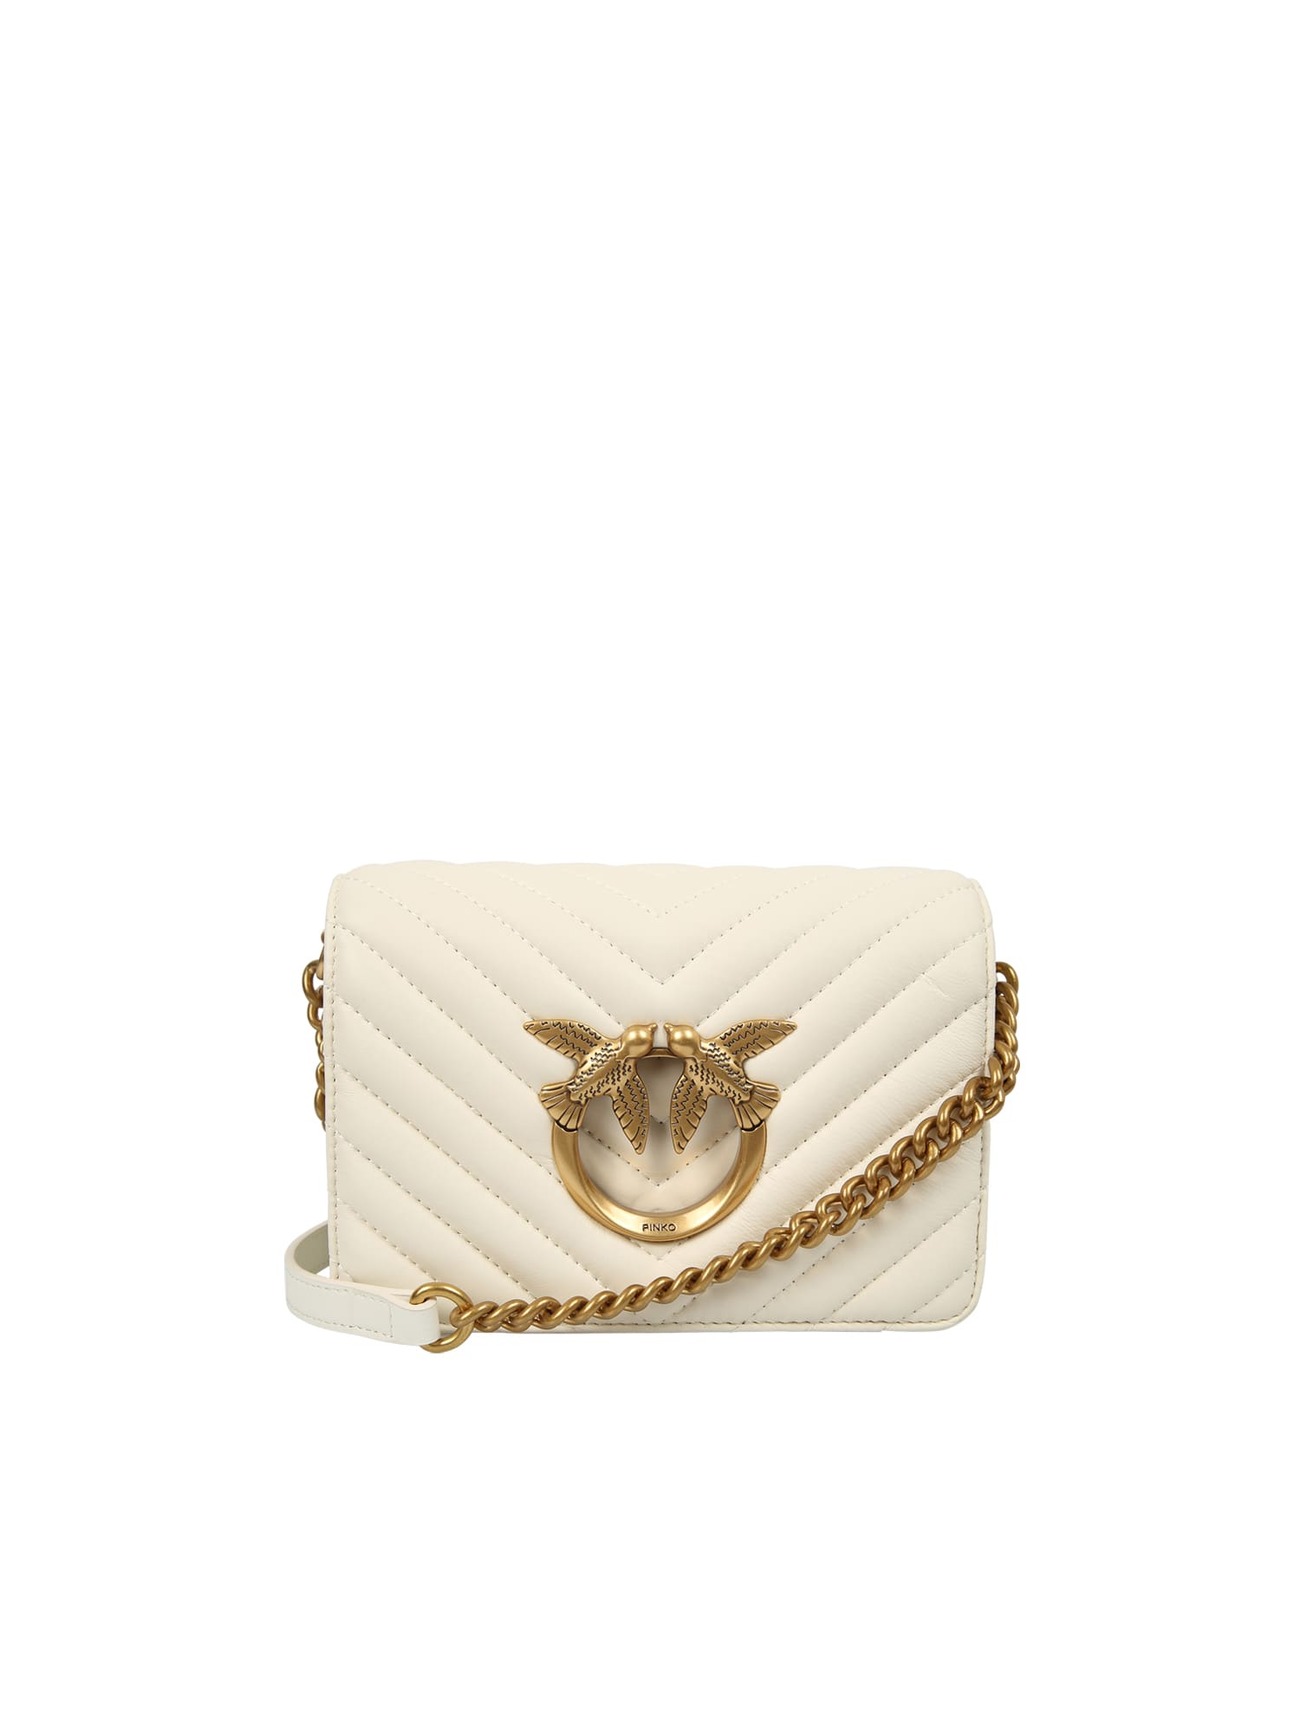 Pinko Quilted Shoulder Bag in white